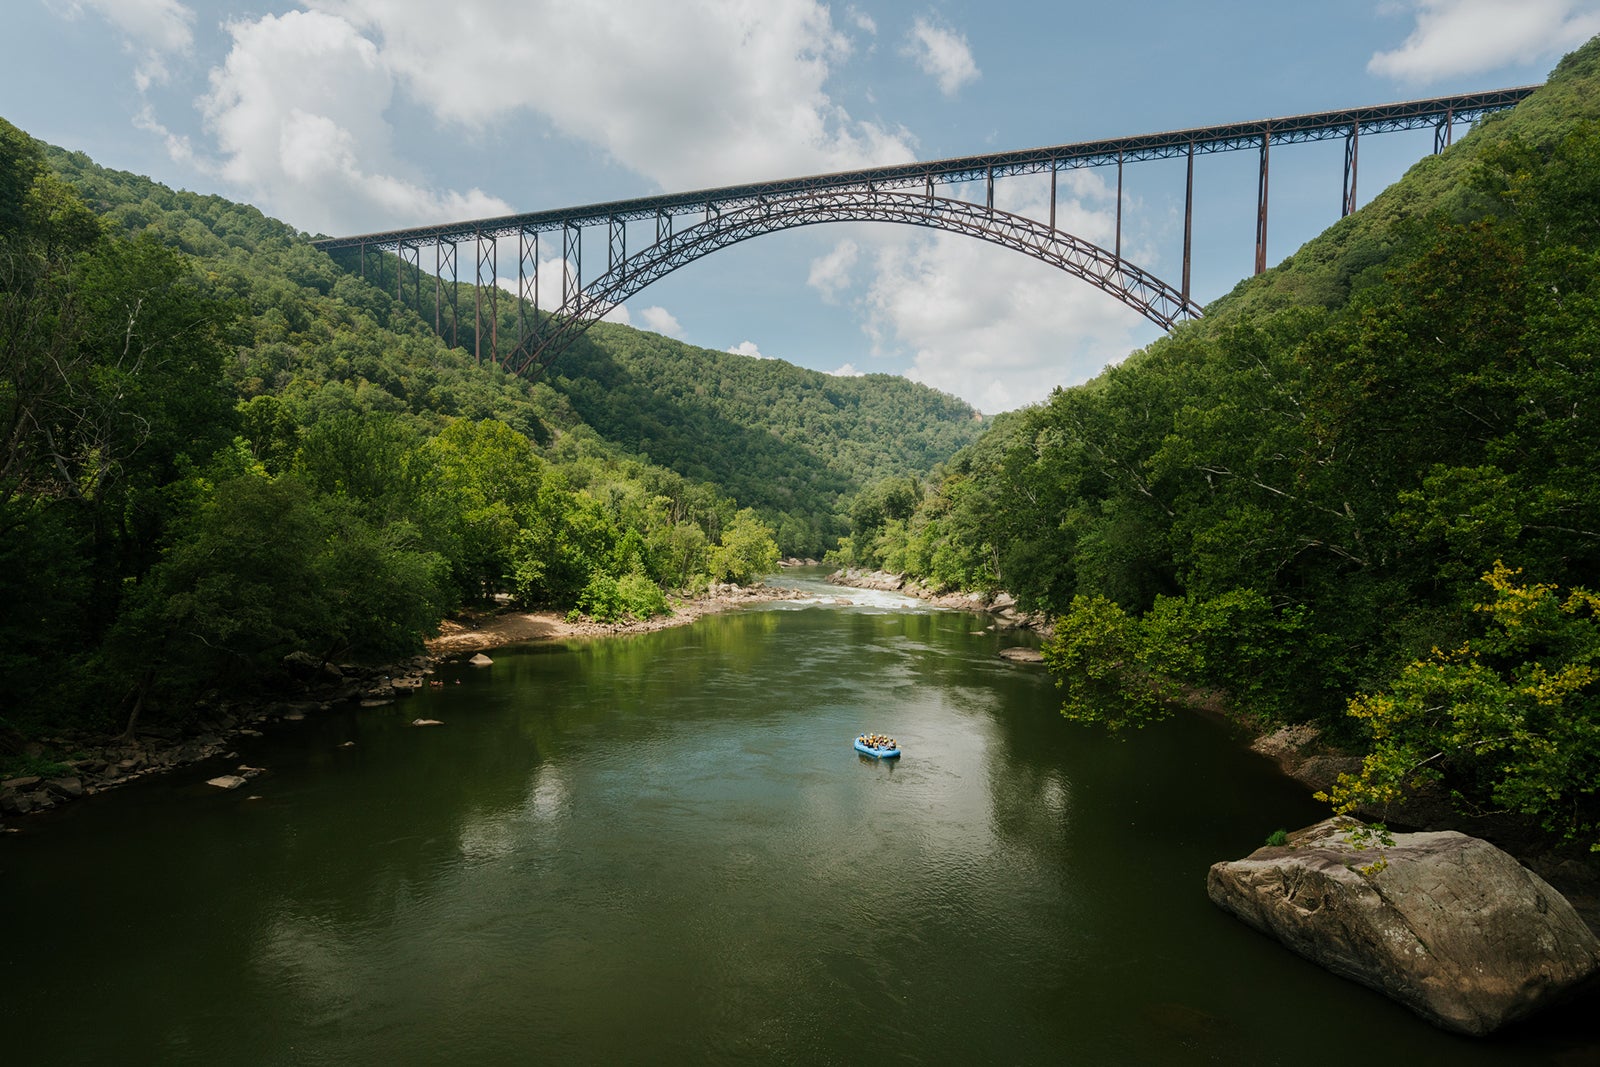 Rafters at the New River Gorge Bridge in West Virginia BackyardProduction